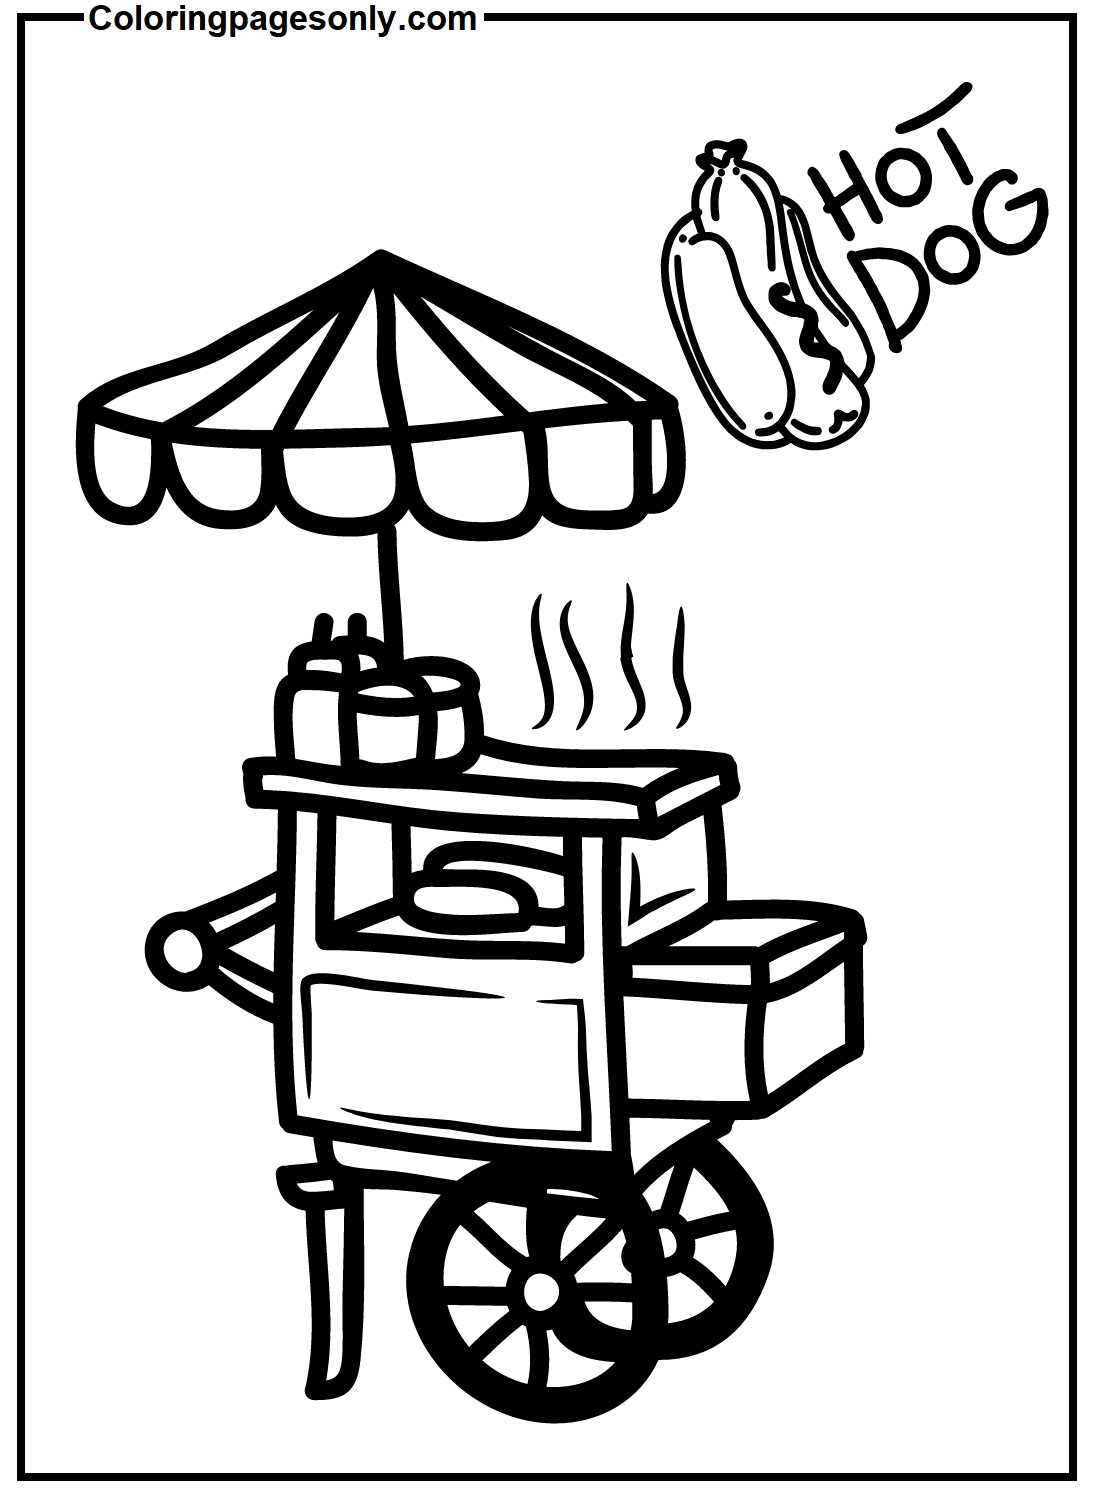 Hot Dog Cart Coloring Pages